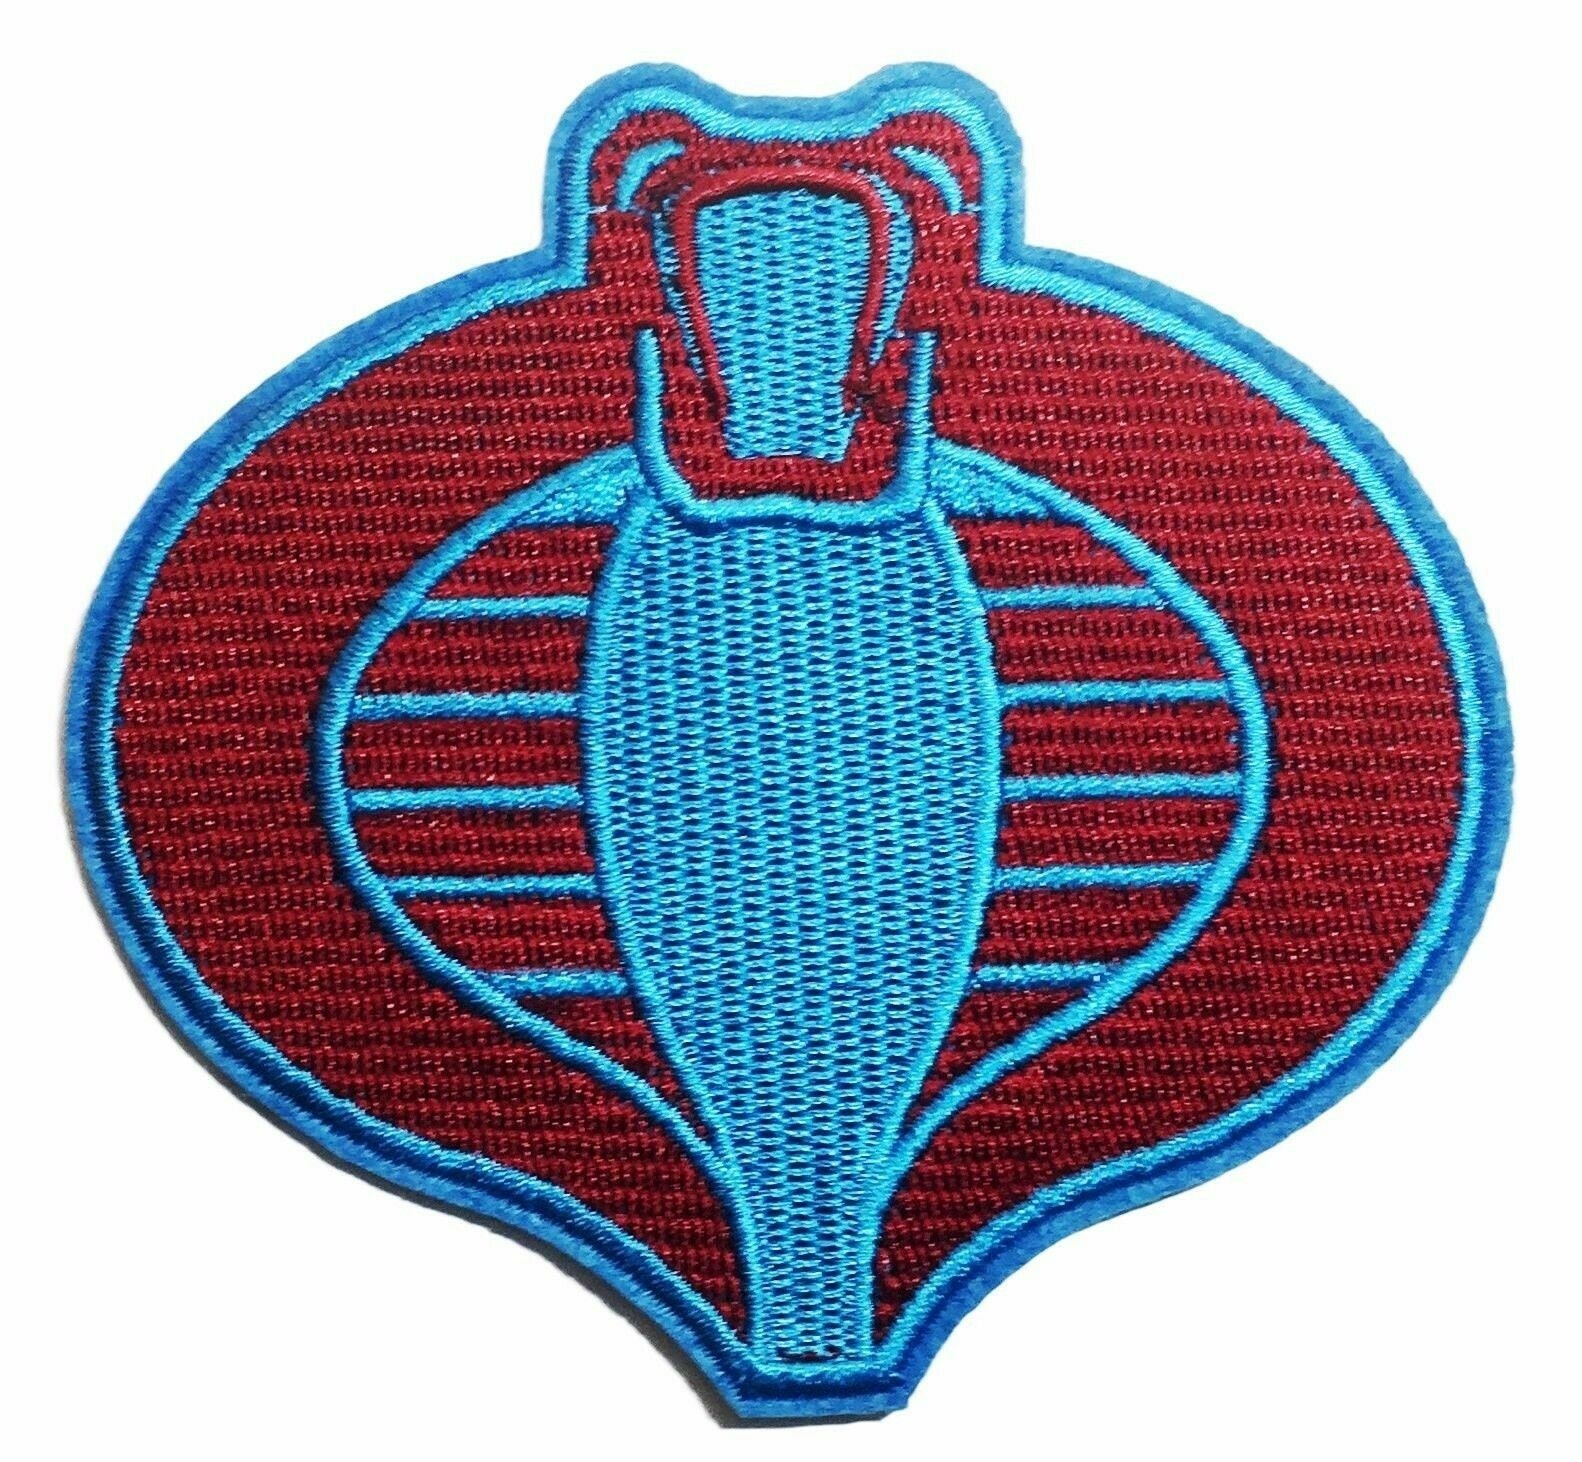 GI Joe Cobra Commander Officer Large 6" Silver/Black Embroidered Iron-On Patch 